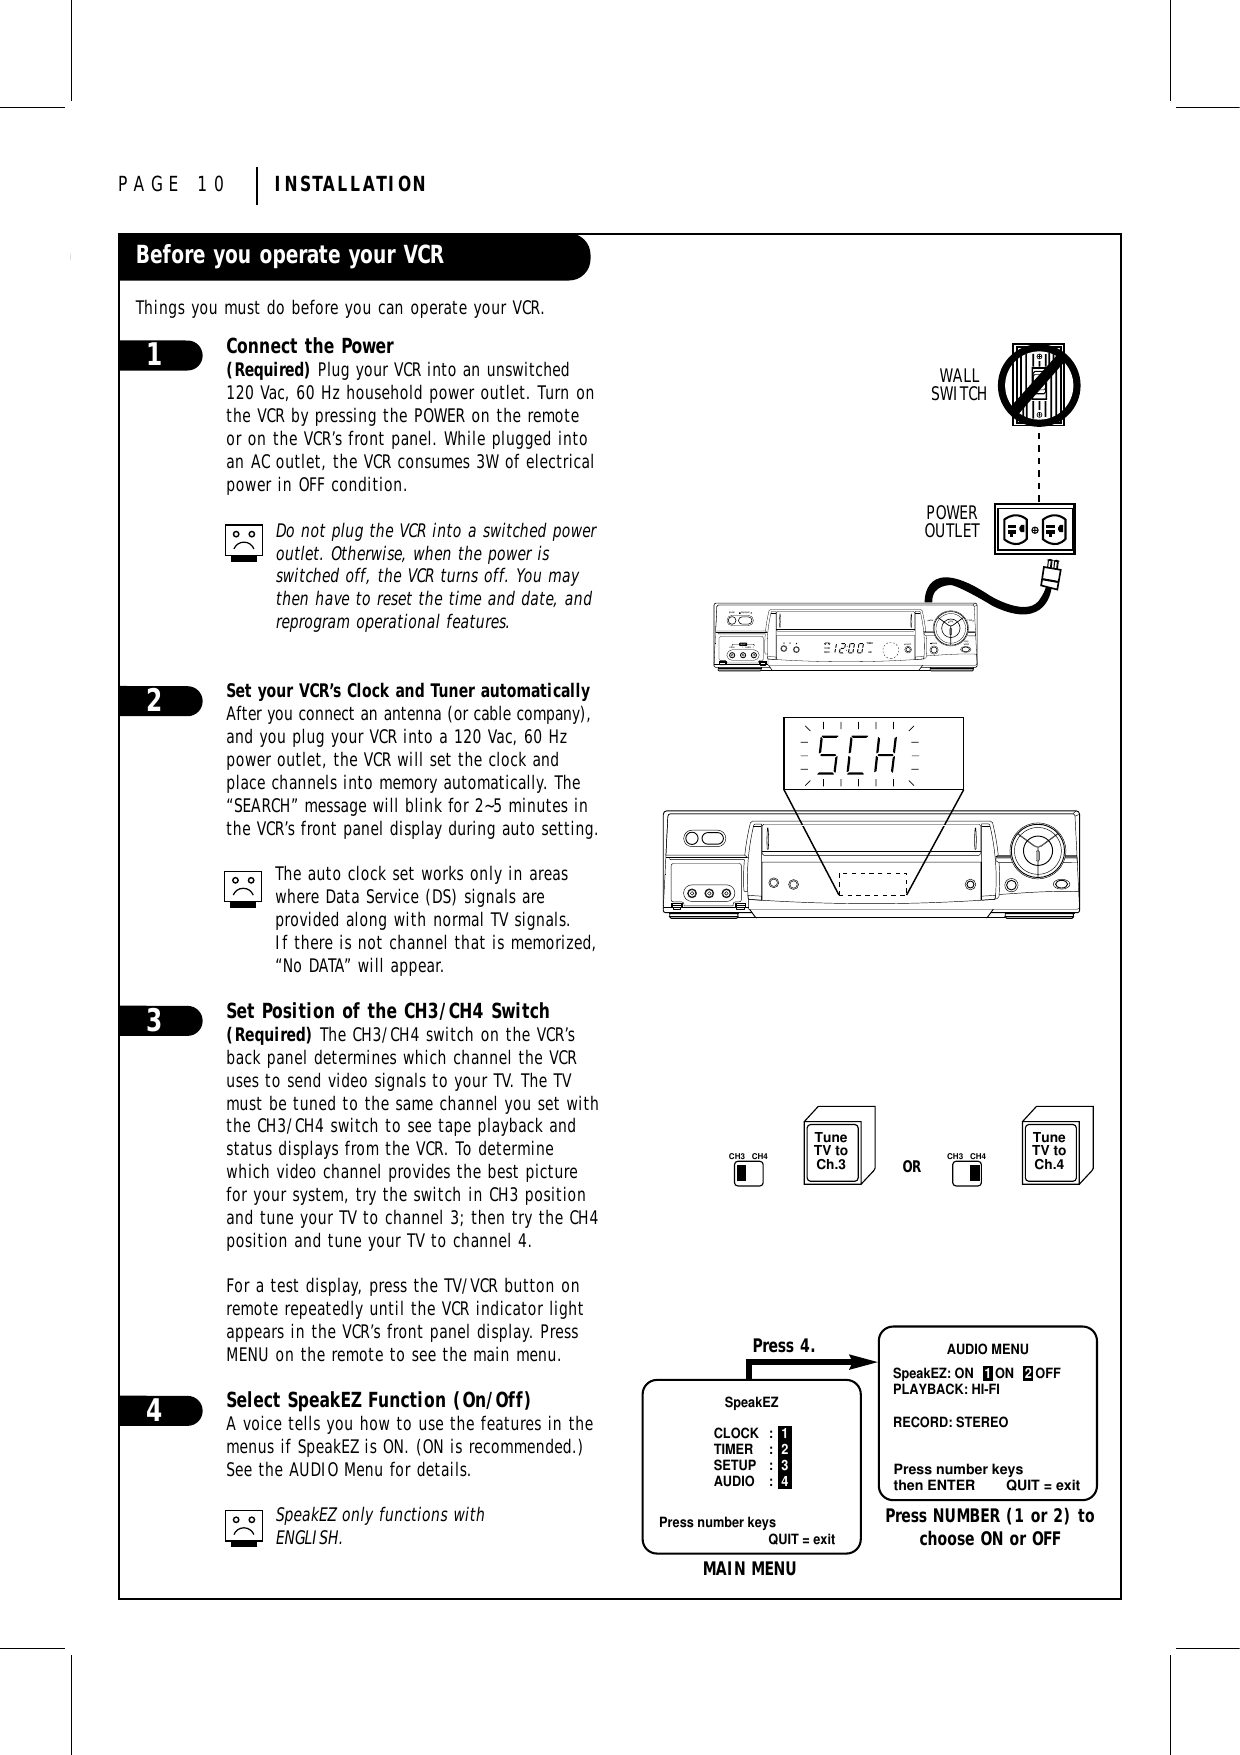 PAGE 10 INSTALLATIONBefore you operate your VCRThings you must do before you can operate your VCR.TYPICAL ZENITH VCRWALLSWITCHPOWEROUTLETTuneTV toCh.3CH3 CH4TuneTV toCh.4CH3 CH4OReasywatchpauserec/itrchvideo l - audio - rstop/ejectpoweraux 2playrew f fwdVCRRECTIMERAMzenithSpeakEZCLOCK : 1TIMER : 2SETUP : 3AUDIO : 4Press number keysQUIT = exitPress number keysthen ENTER QUIT = exitAUDIO MENUSpeakEZ: ON   1 ON   2 OFFPLAYBACK: HI-FI RECORD: STEREOMAIN MENUPress NUMBER (1 or 2) tochoose ON or OFFPress 4.Connect the Power(Required) Plug your VCR into an unswitched120 Vac, 60 Hz household power outlet. Turn onthe VCR by pressing the POWER on the remoteor on the VCR’s front panel. While plugged intoan AC outlet, the VCR consumes 3W of electricalpower in OFF condition.Do not plug the VCR into a switched power outlet. Otherwise, when the power isswitched off, the VCR turns off. You maythen have to reset the time and date, andreprogram operational features.Set your VCR’s Clock and Tuner automaticallyAfter you connect an antenna (or cable company),and you plug your VCR into a 120 Vac, 60 Hzpower outlet, the VCR will set the clock andplace channels into memory automatically. The“SEARCH” message will blink for 2~5 minutes inthe VCR’s front panel display during auto setting.The auto clock set works only in areaswhere Data Service (DS) signals are provided along with normal TV signals.If there is not channel that is memorized,“No DATA” will appear. Set Position of the CH3/CH4 Switch(Required) The CH3/CH4 switch on the VCR’sback panel determines which channel the VCRuses to send video signals to your TV. The TVmust be tuned to the same channel you set withthe CH3/CH4 switch to see tape playback andstatus displays from the VCR. To determinewhich video channel provides the best picturefor your system, try the switch in CH3 positionand tune your TV to channel 3; then try the CH4position and tune your TV to channel 4.For a test display, press the TV/VCR button onremote repeatedly until the VCR indicator lightappears in the VCR’s front panel display. PressMENU on the remote to see the main menu.Select SpeakEZ Function (On/Off)A voice tells you how to use the features in themenus if SpeakEZ is ON. (ON is recommended.)See the AUDIO Menu for details.SpeakEZ only functions with ENGLISH.3412